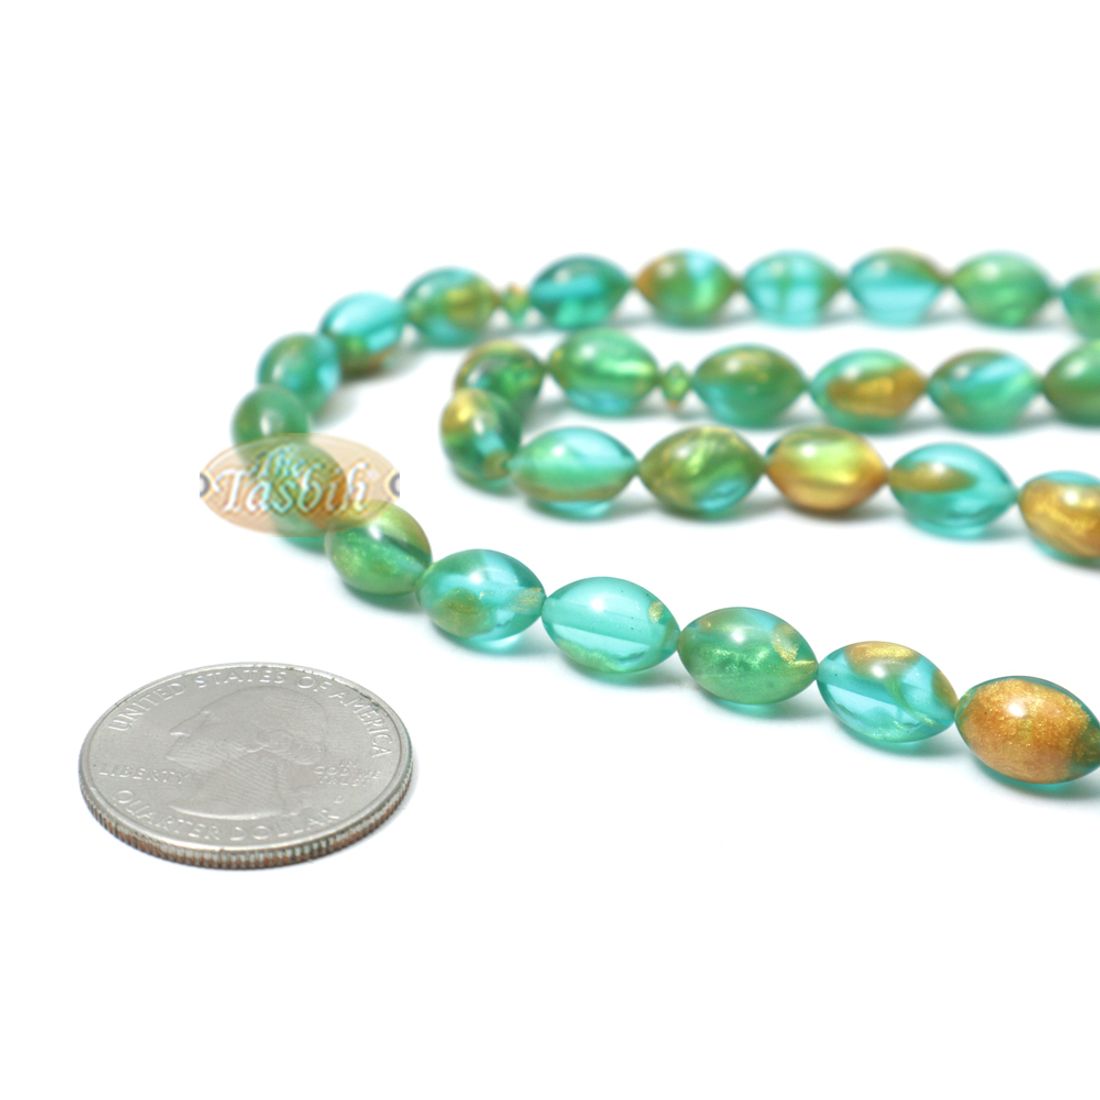 Islamic Prayer Beads Small 33-ct Tasbih 7×11-mm Oval Acrylic Translucent Marbled Turquoise Blue Green Gold from Konya Silver Kizilay Charms